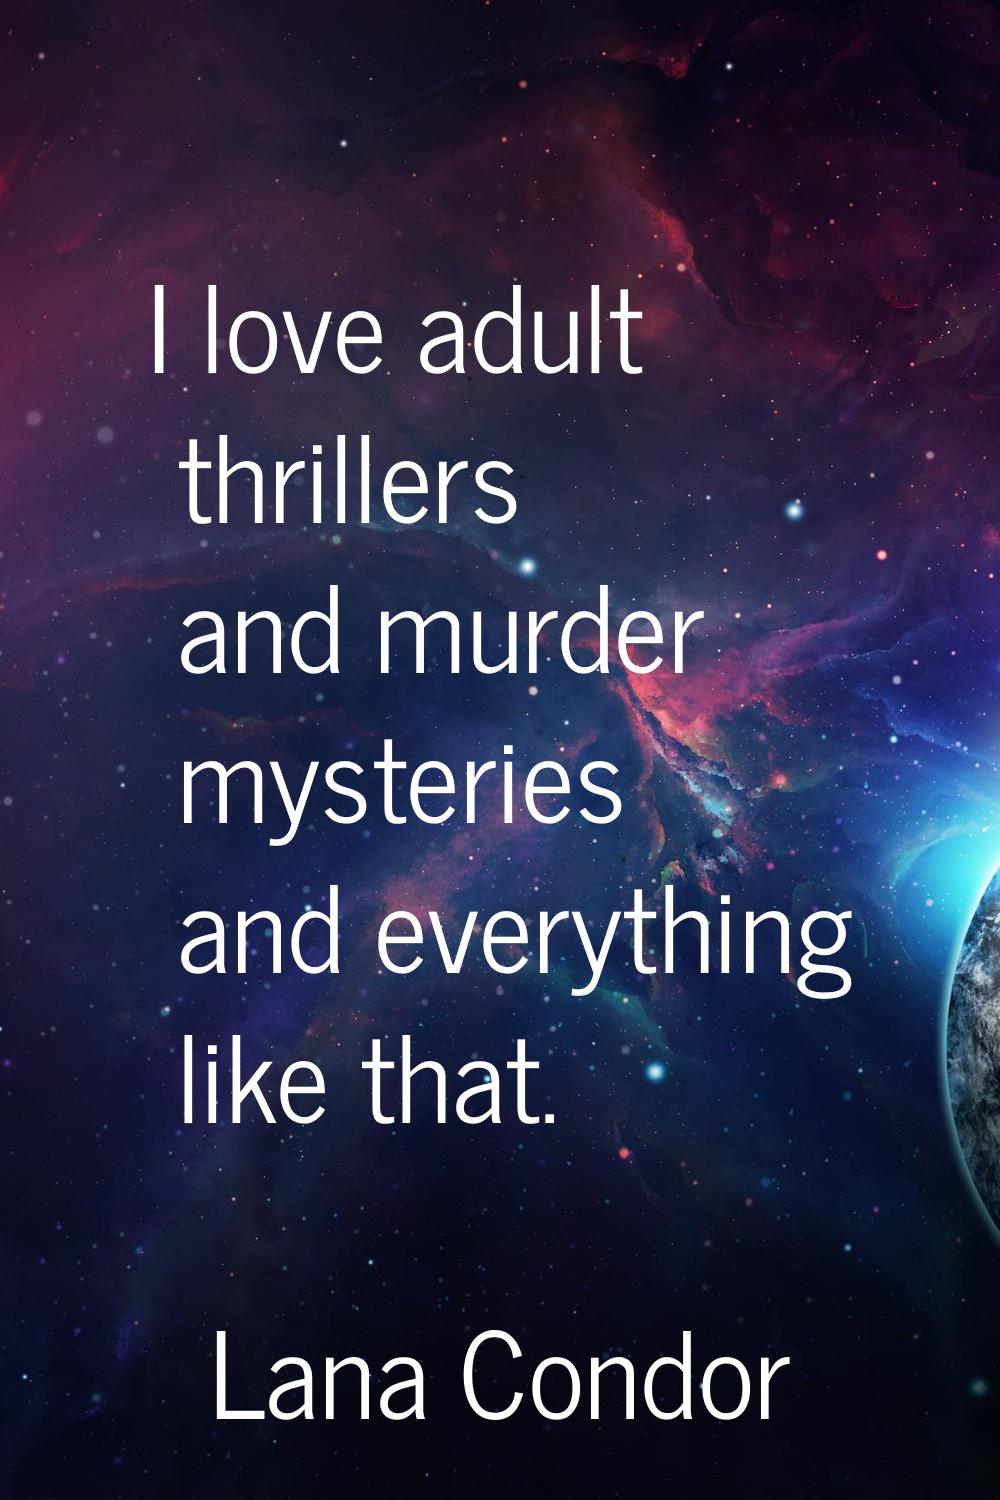 I love adult thrillers and murder mysteries and everything like that.